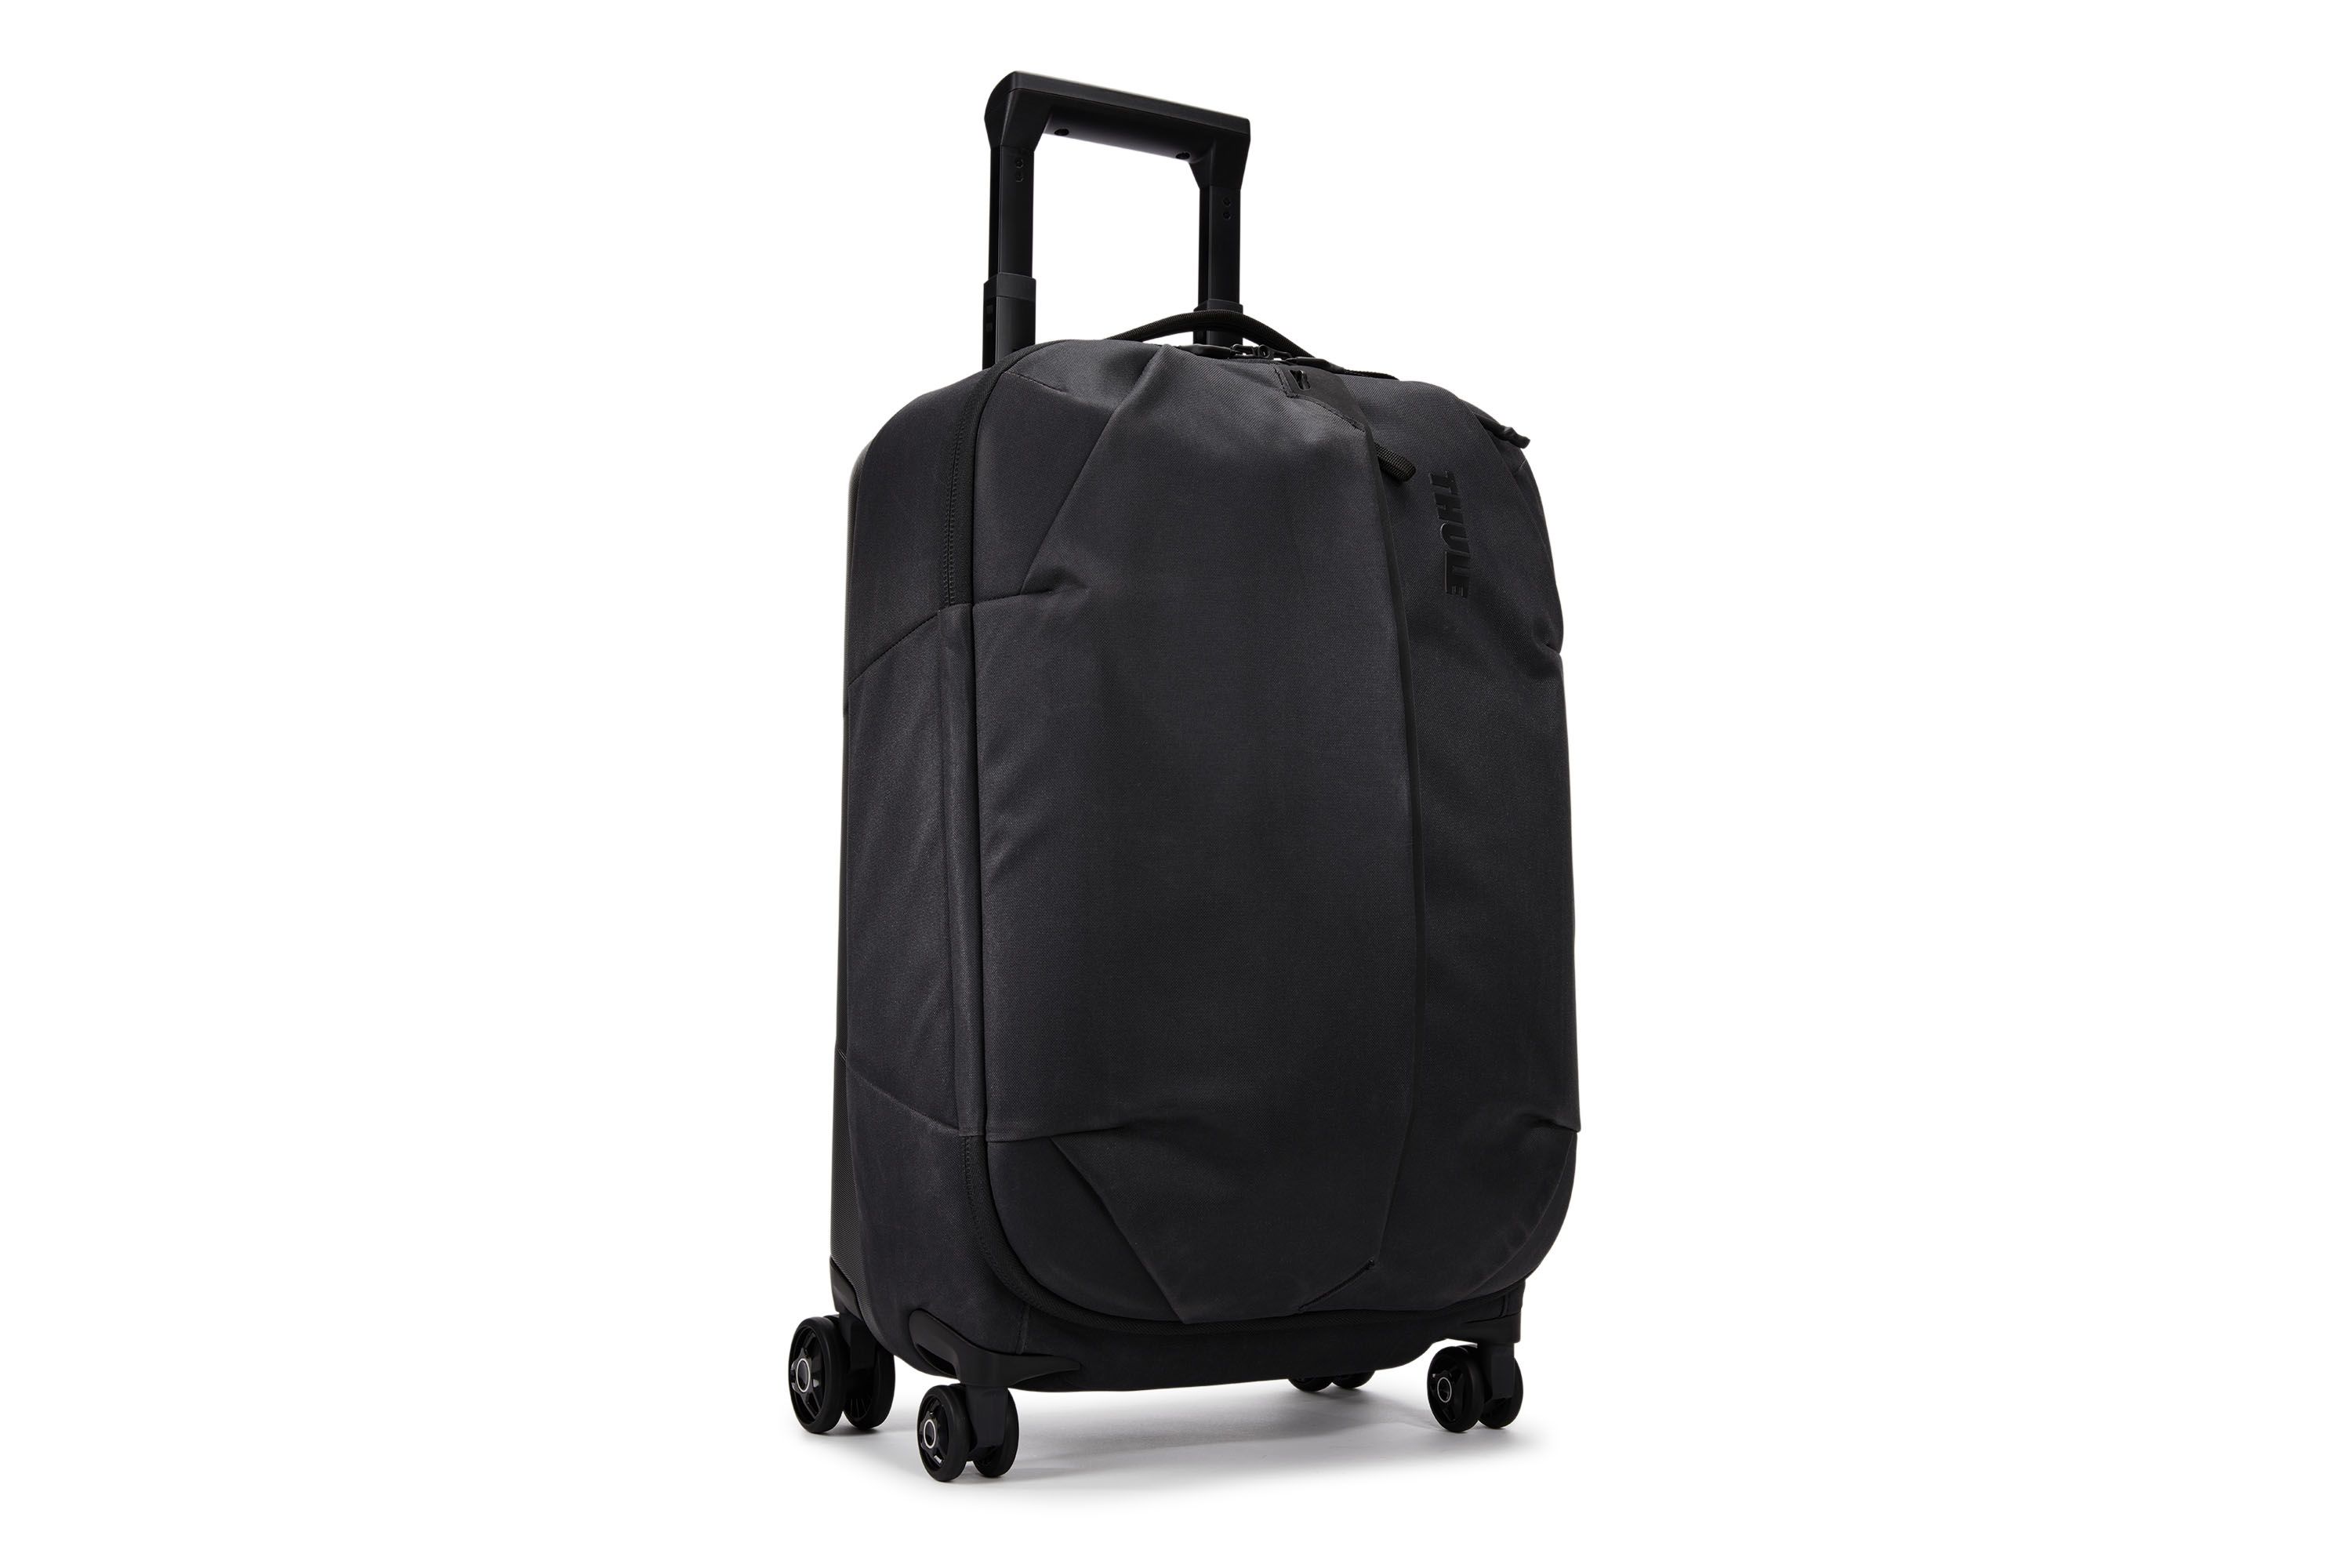 Thule - Aion Carry On Spinner - Black